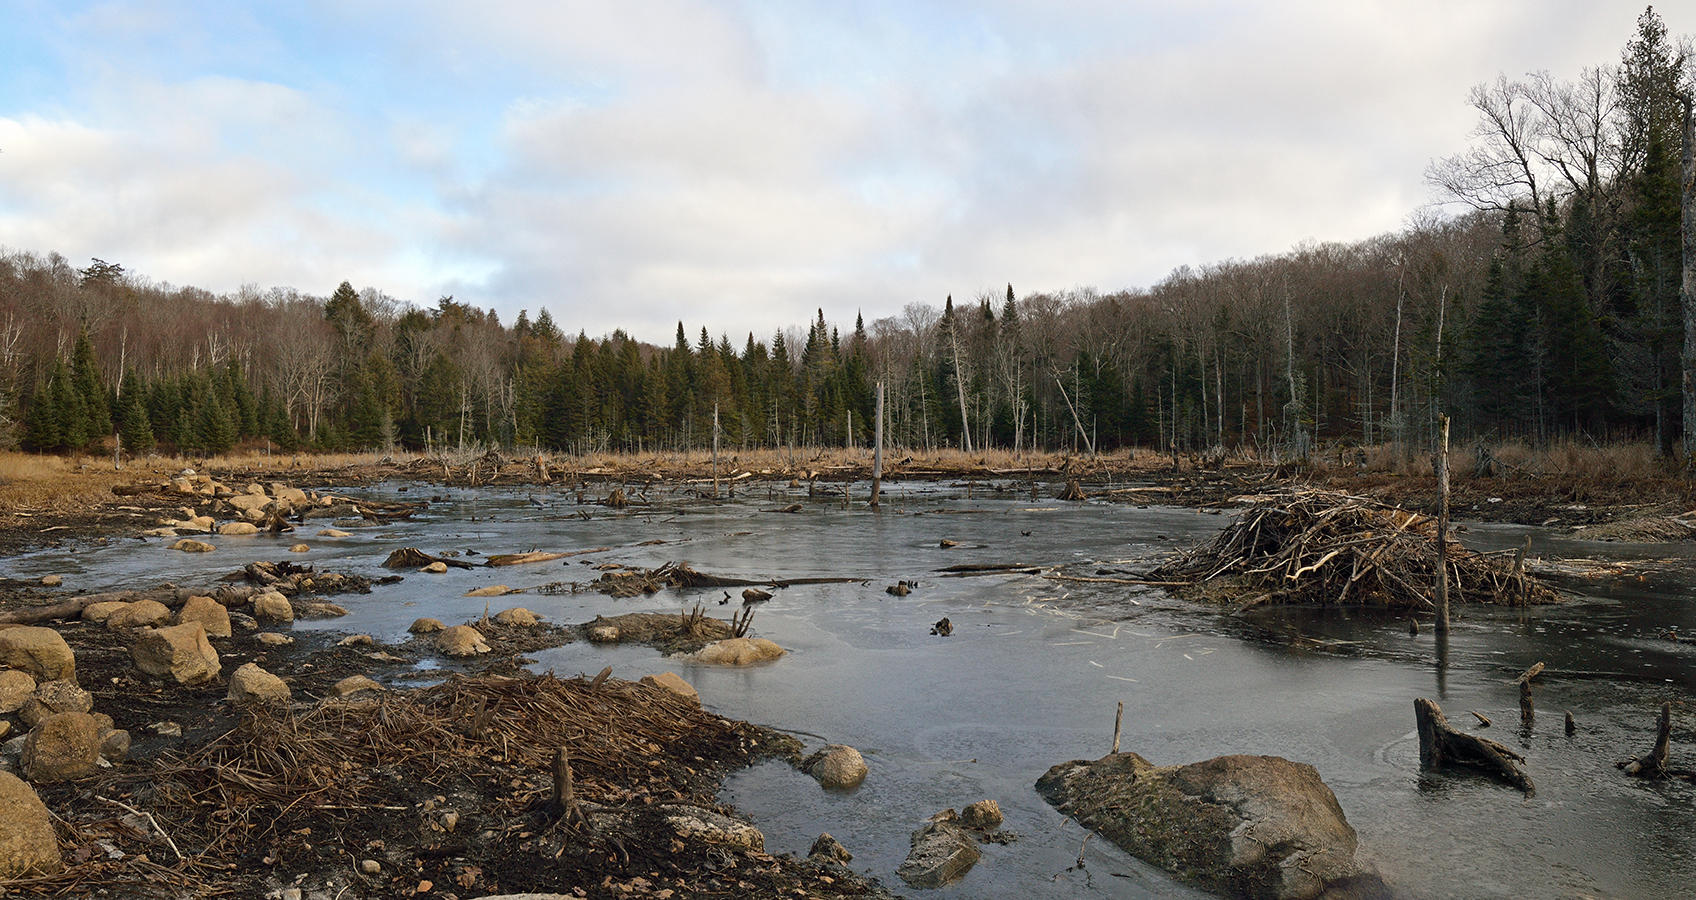 Whats left of the beaver pond after the dam burst